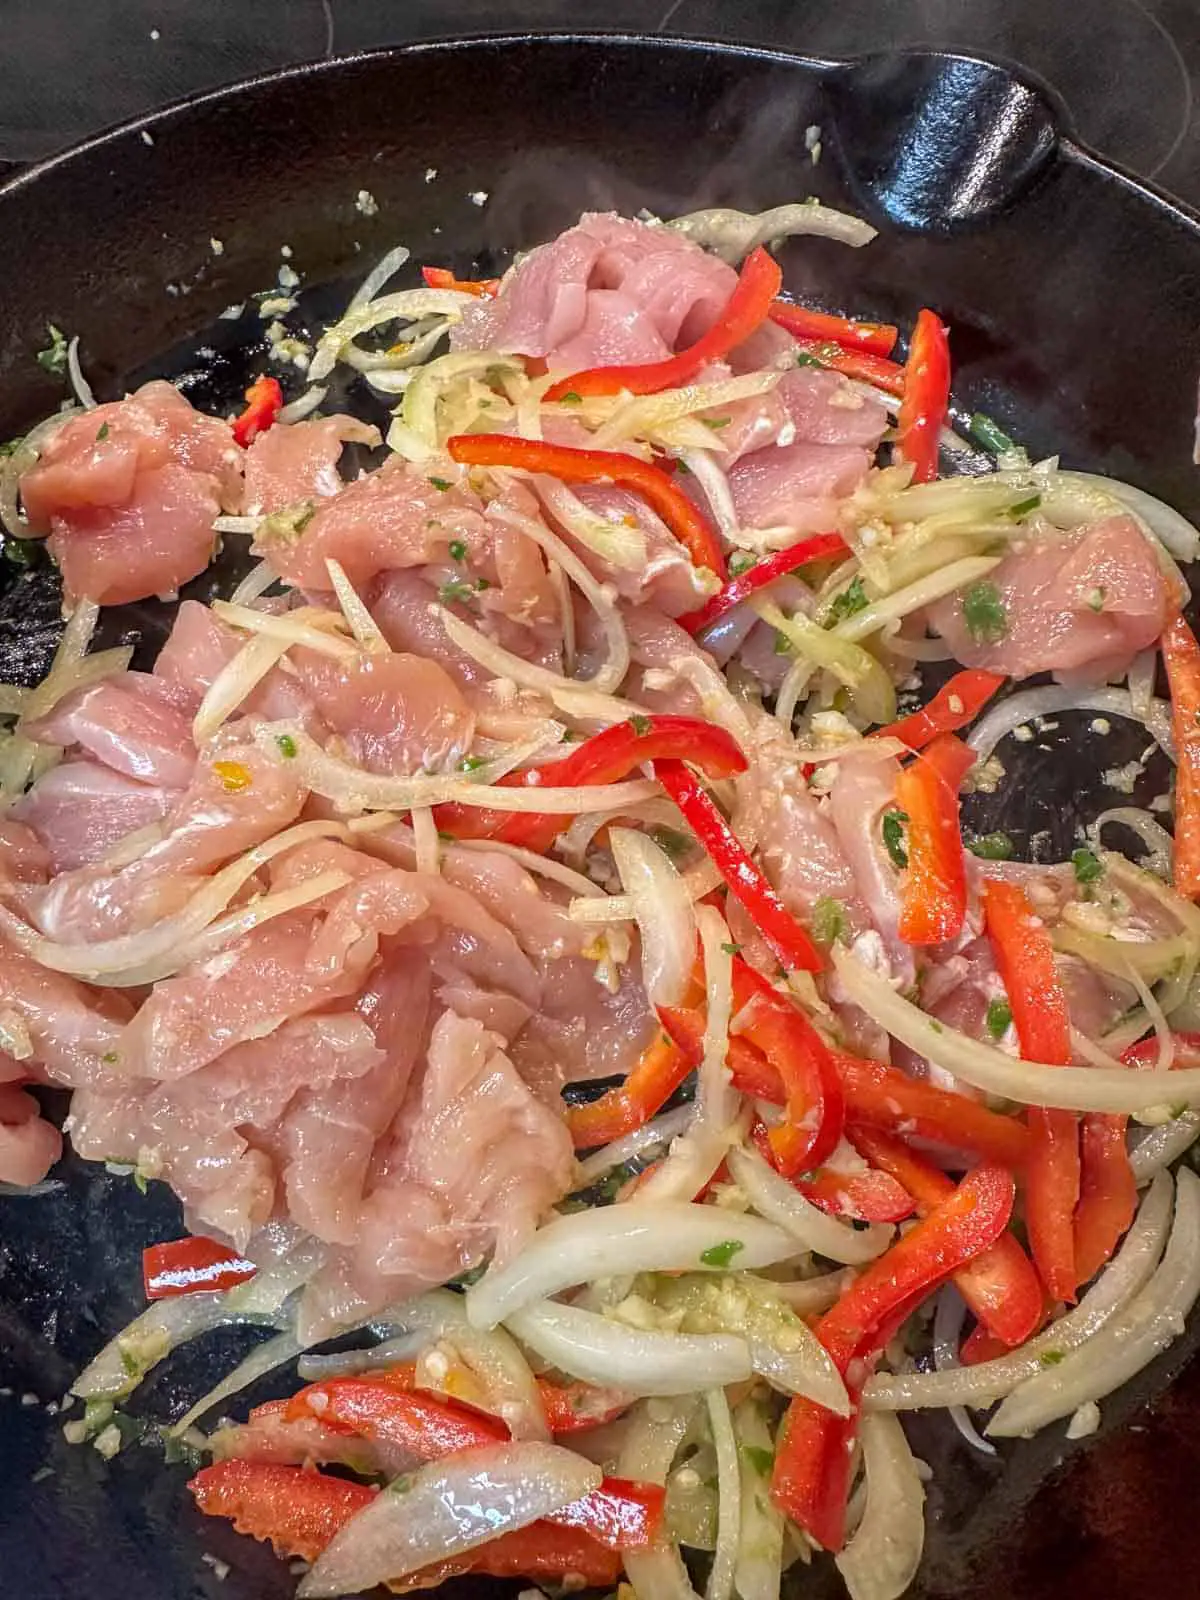 Raw sliced chicken, sliced red bell pepper, sliced onion, and minced garlic and chilis in a cast iron pan.